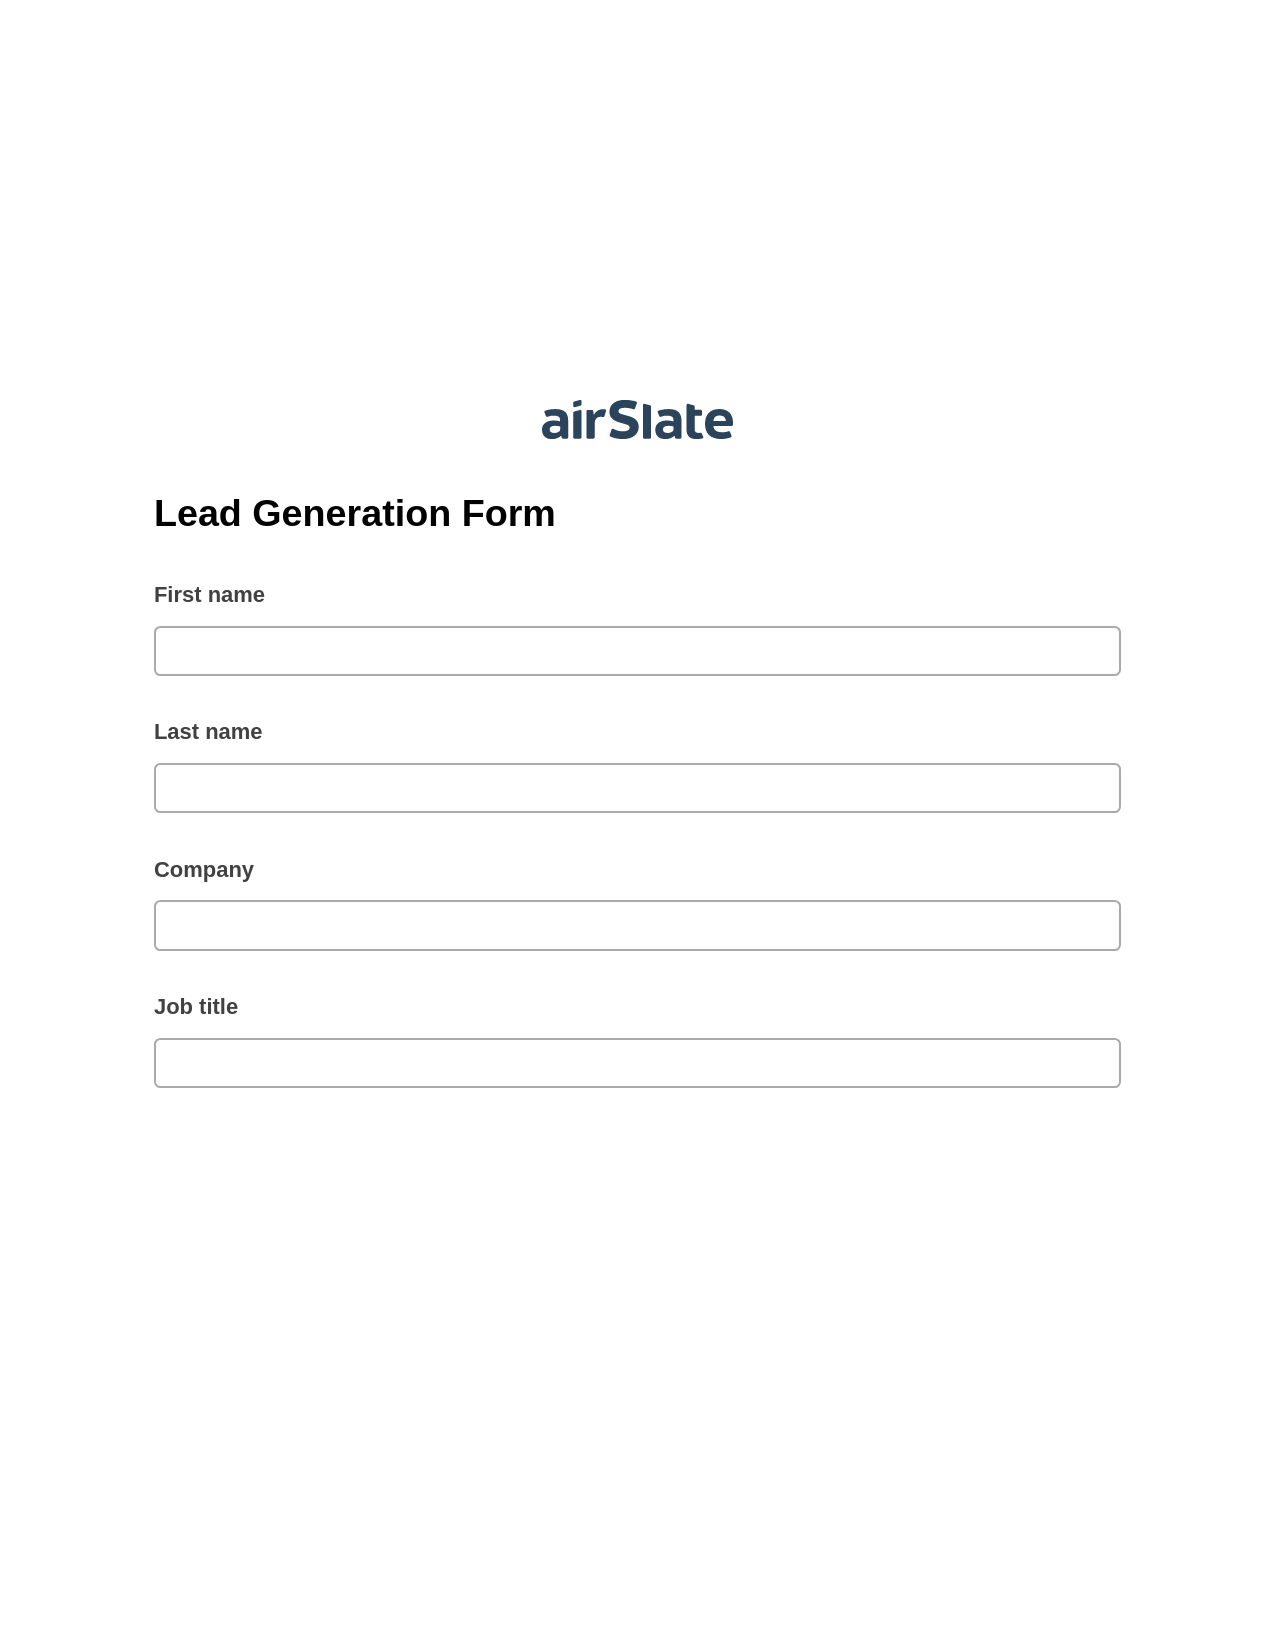 Lead Generation Form Pre-fill from Office 365 Excel Bot, Remove Tags From Slate Bot, Post-finish Document Bot